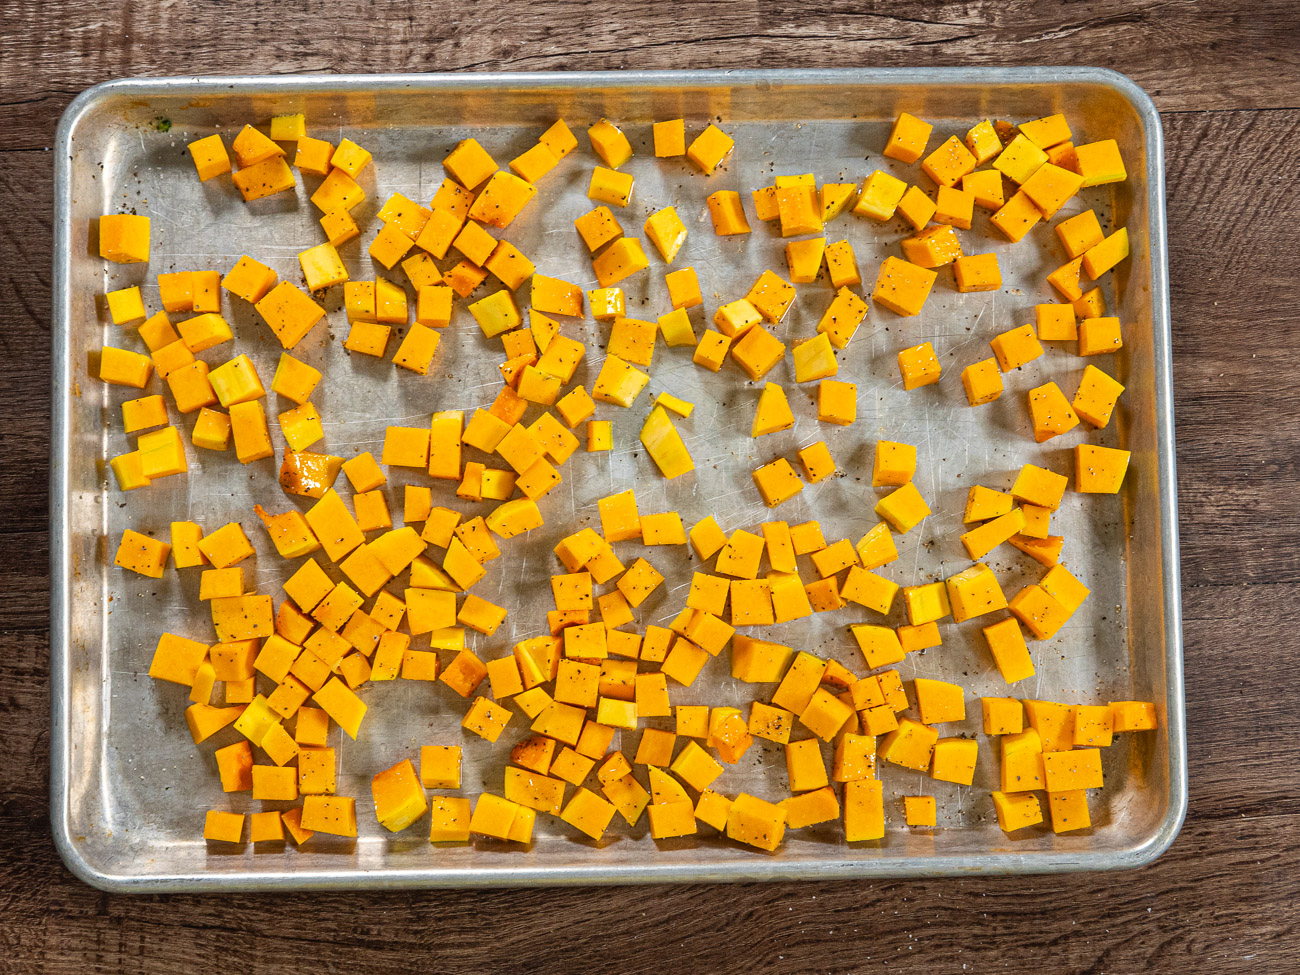 Arrange butternut squash on a baking sheet and drizzle with olive oil. Season with salt and pepper and toss to combine. Bake until pierced easily with a fork, about 30 minutes.